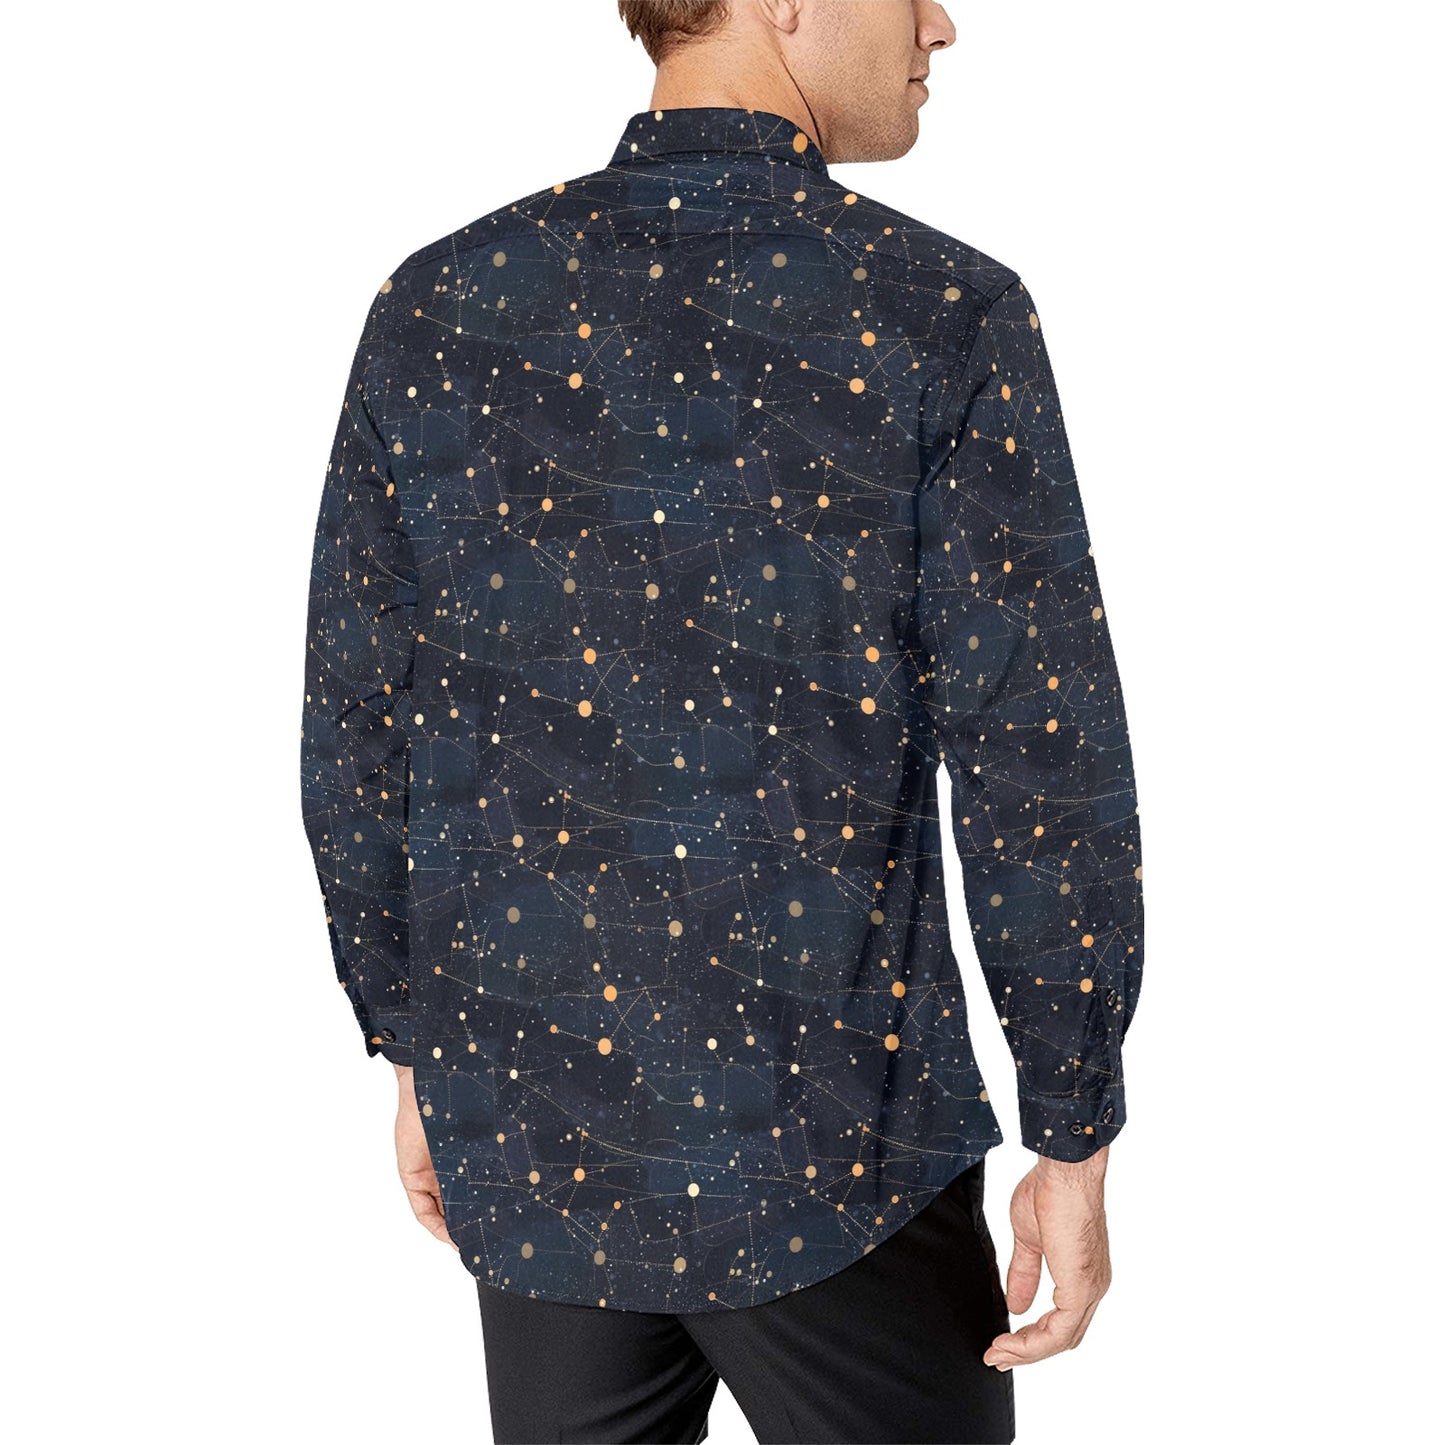 Constellation Space Long Sleeve Men Button Up Shirt, Universe Stars Print Dress Buttoned Collared Casual Dress Shirt with Chest Pocket Starcove Fashion